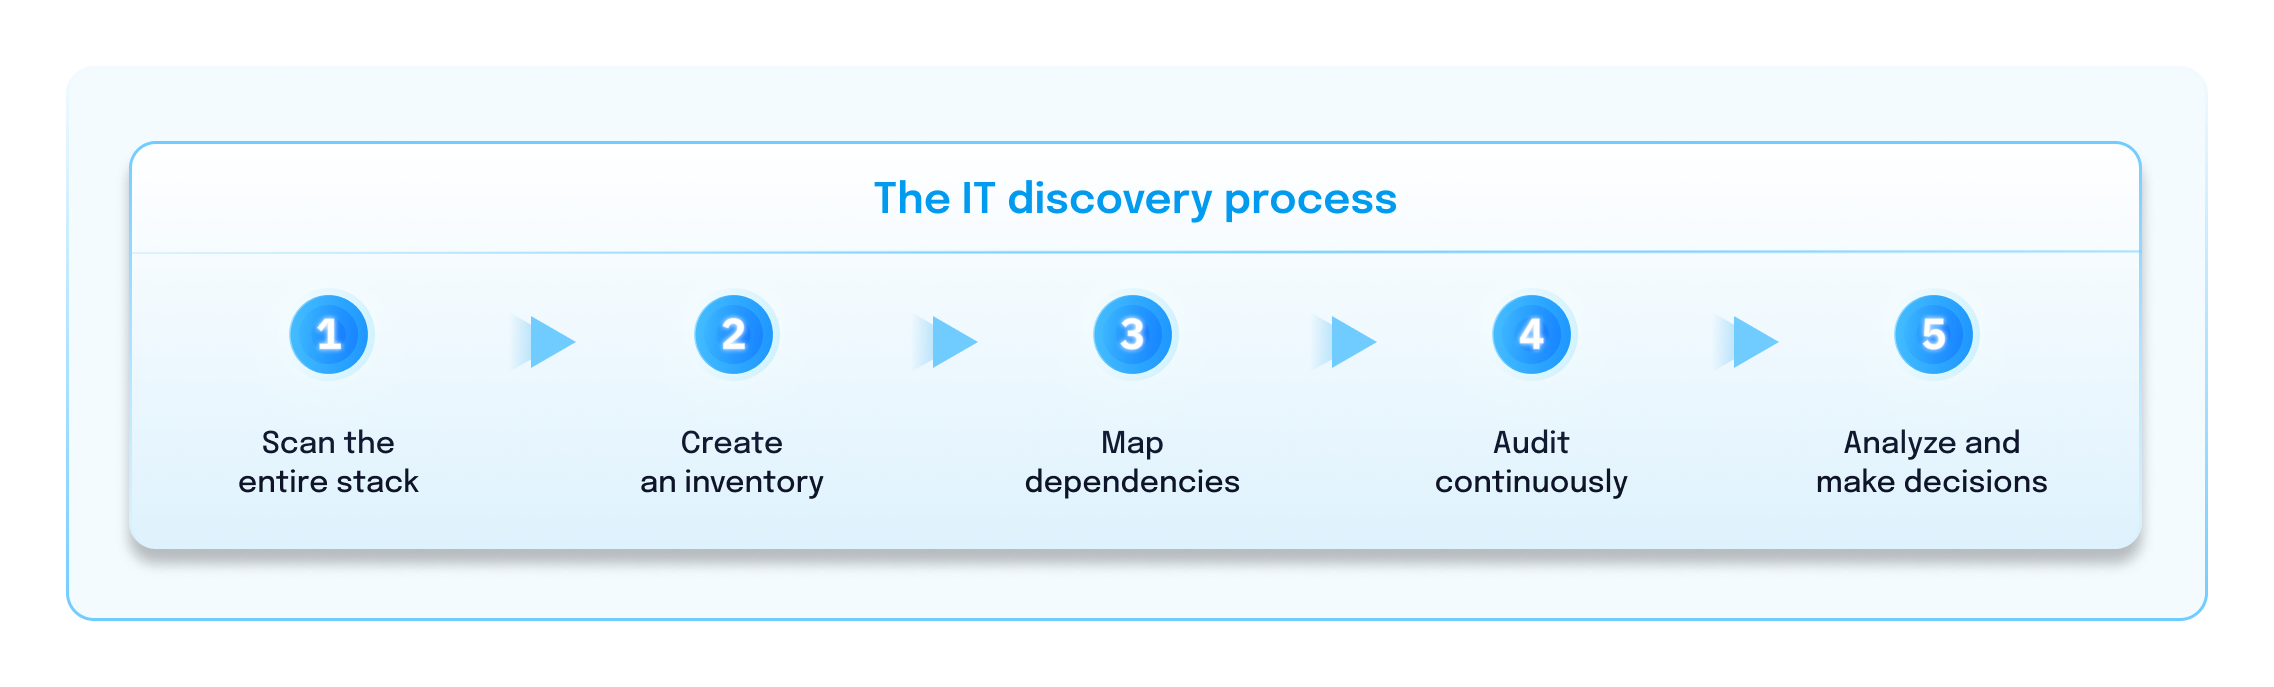 IT discovery process graphic